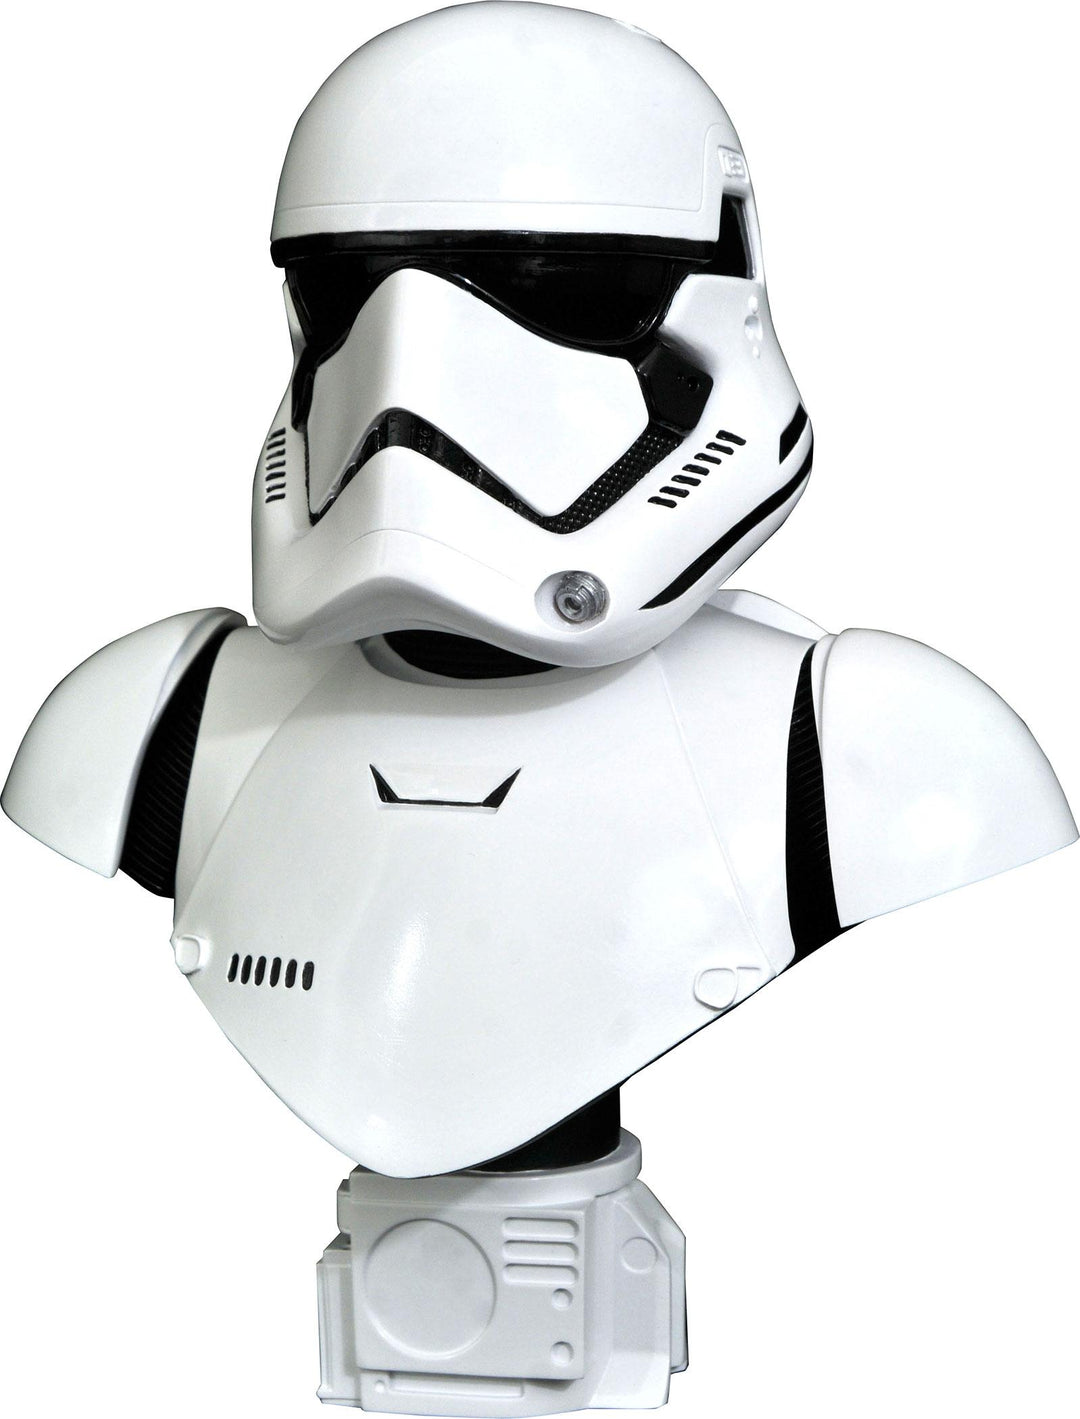 Star Wars: The Force AwakensLegends in 3D 1/2 Scale First Order Stormtrooper Bust 25 c - Infinity Collectables 